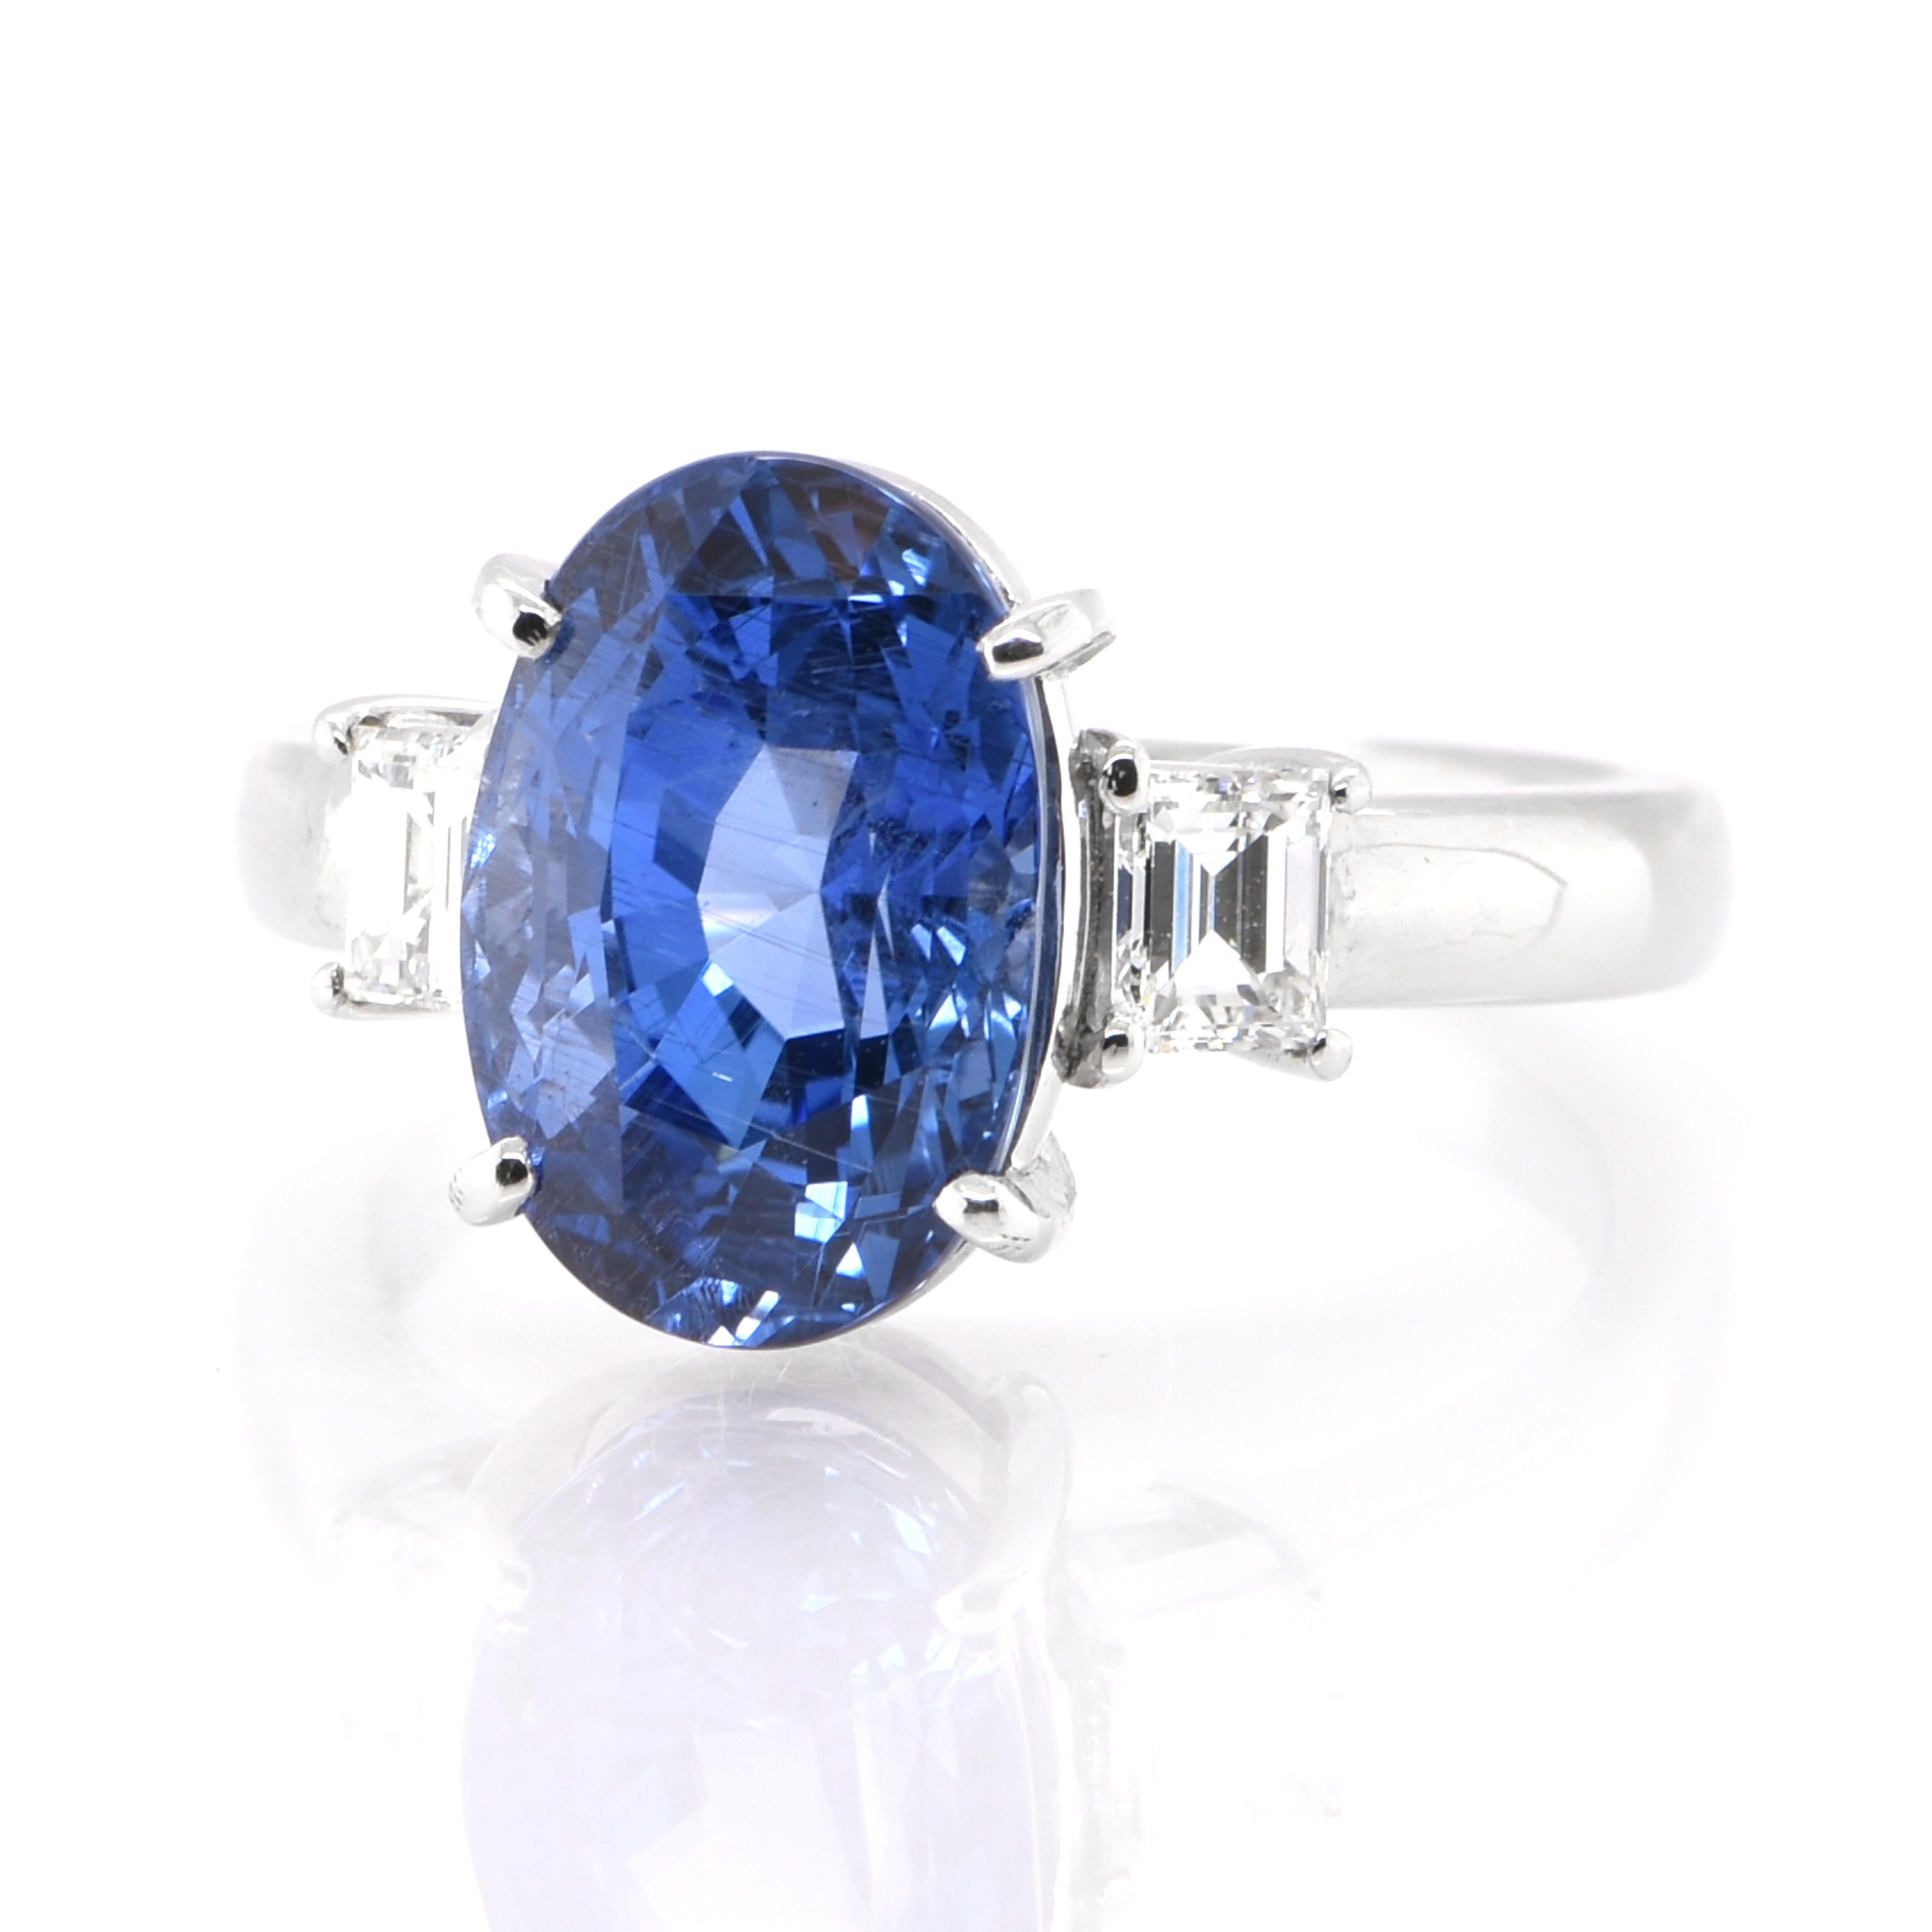 A beautiful ring featuring GIA Certified 6.01 Carat Natural Burmese, Unheated Sapphire and 0.50 Carats Diamond Accents set in Platinum. Sapphires have extraordinary durability - they excel in hardness as well as toughness and durability making them